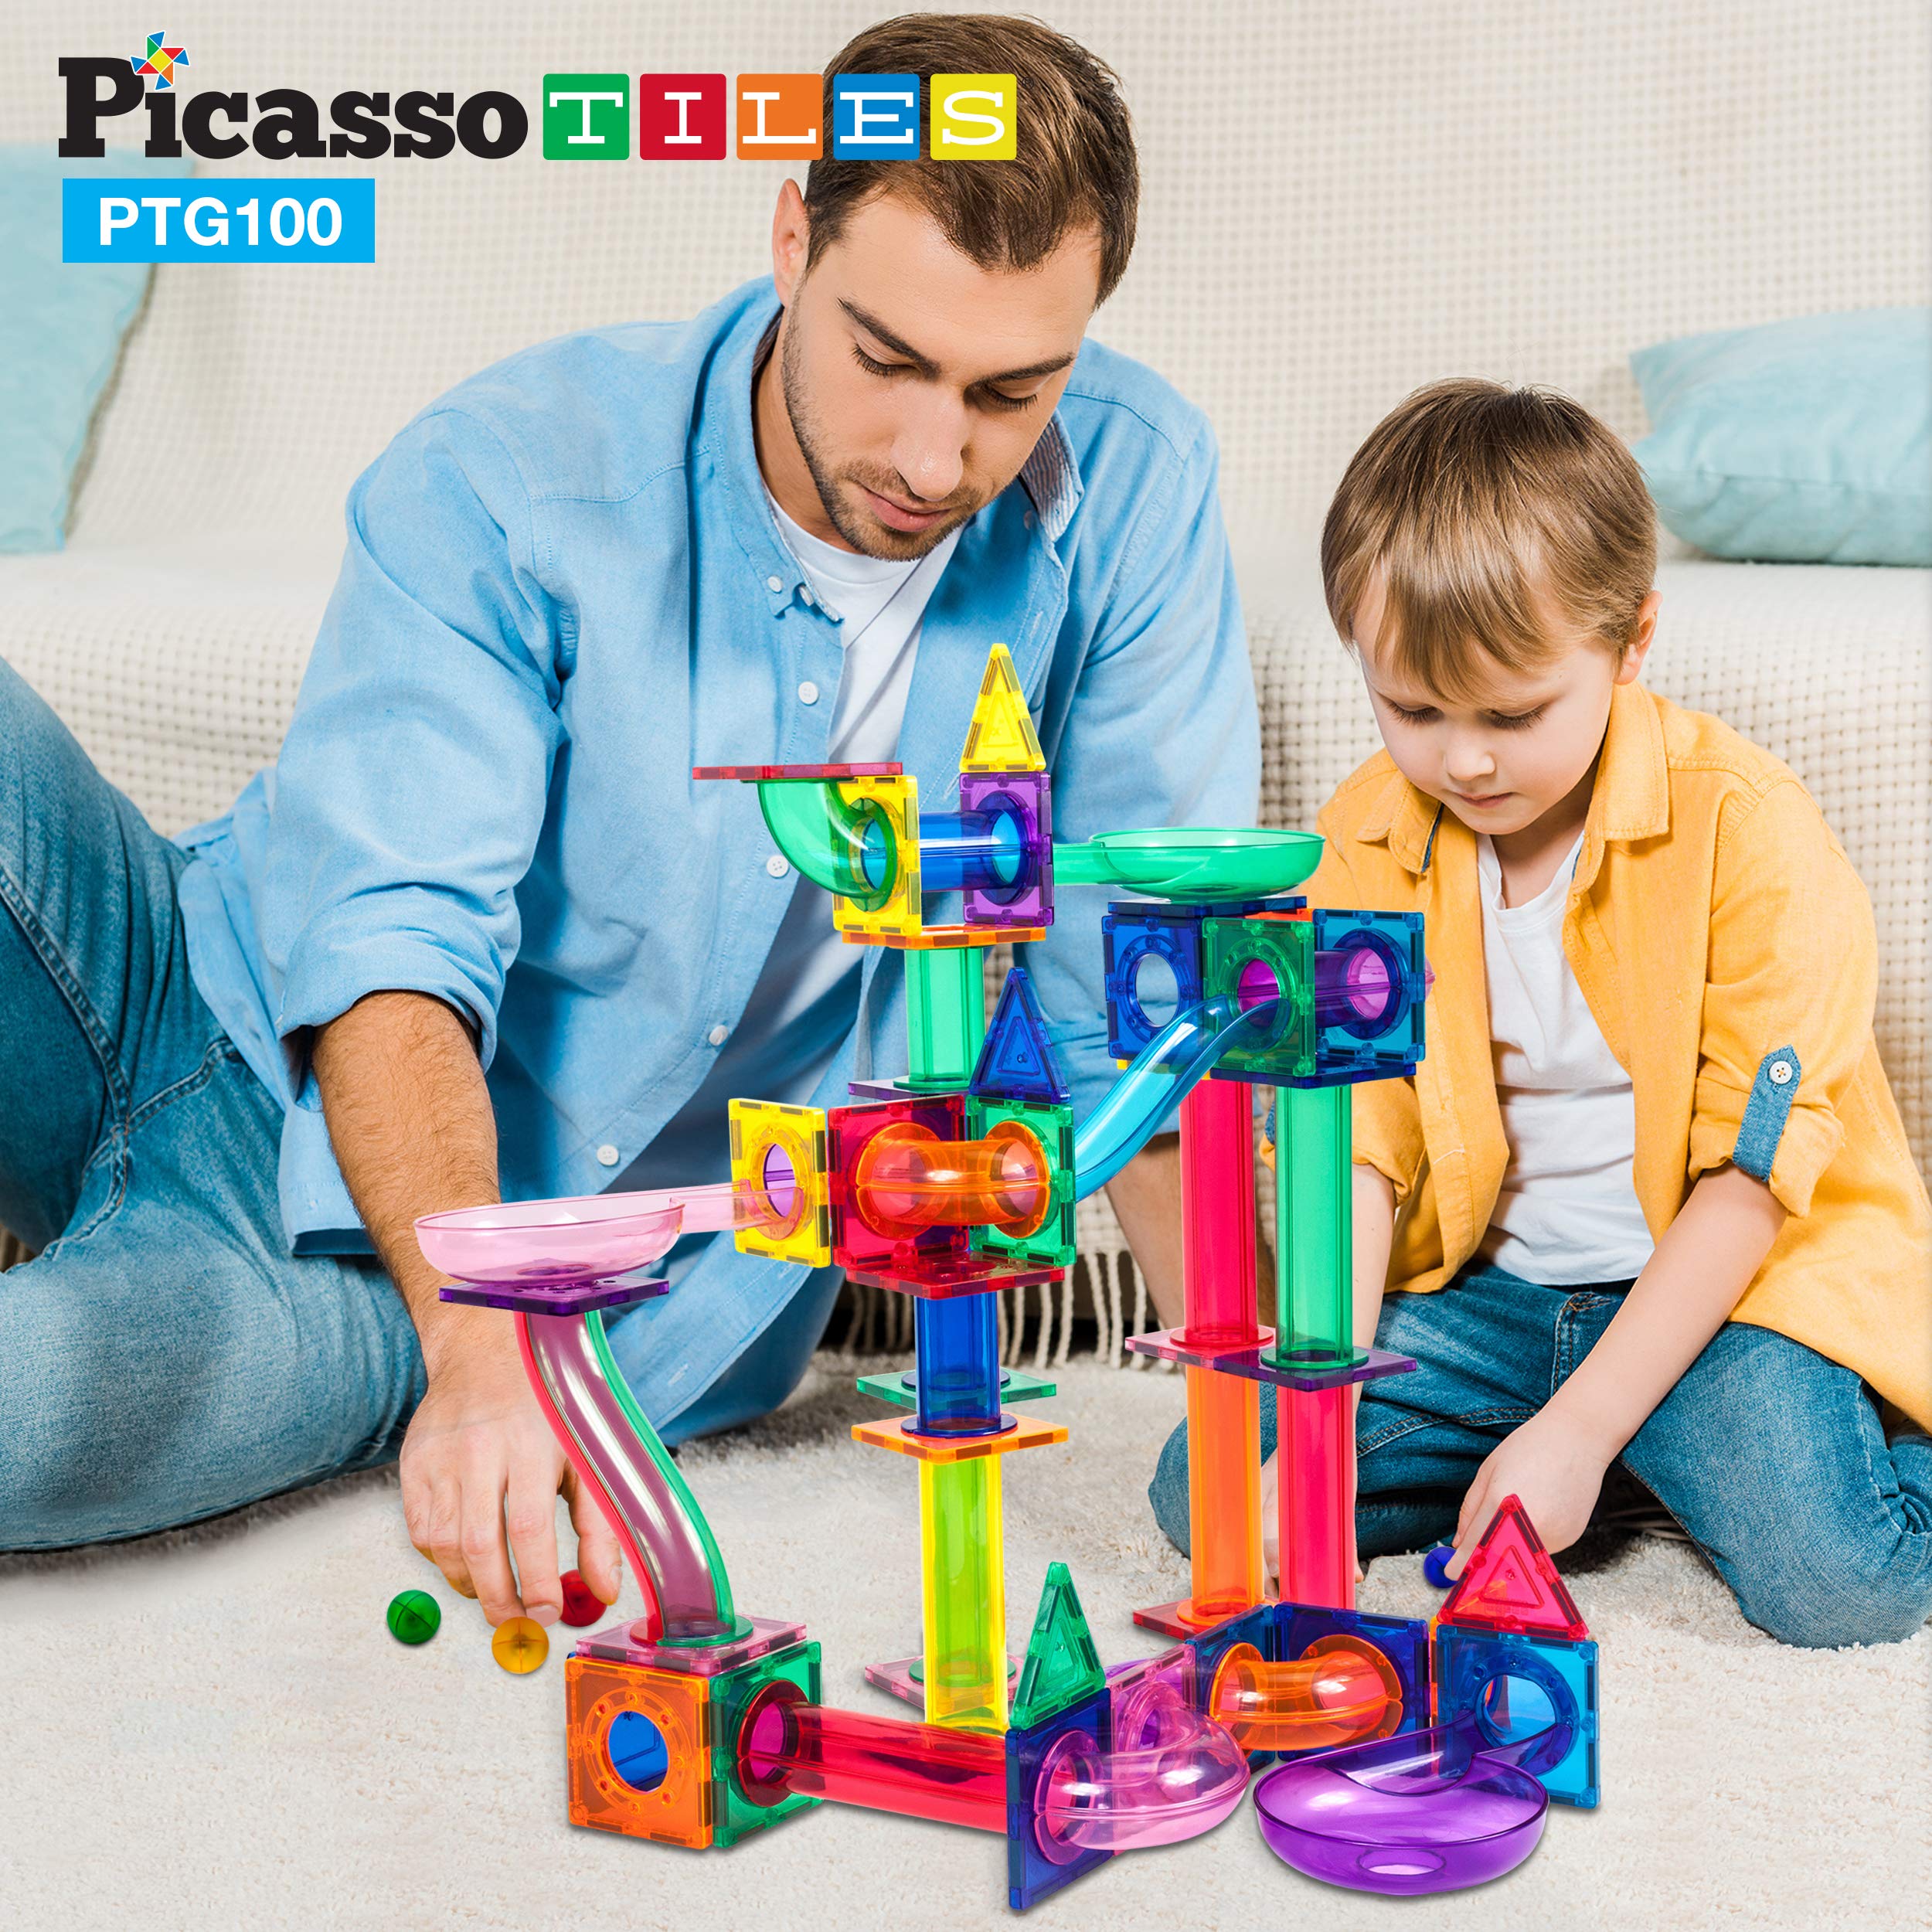 PicassoTiles 100PC Magnet Tiles + 100PC Marble Run Race Track Fun & Creative Playset Bundle, STEAM Learning & Educational Sensory Toy for Preschool & Kindergarten Kids Ages 3+, A Classrom Must Have